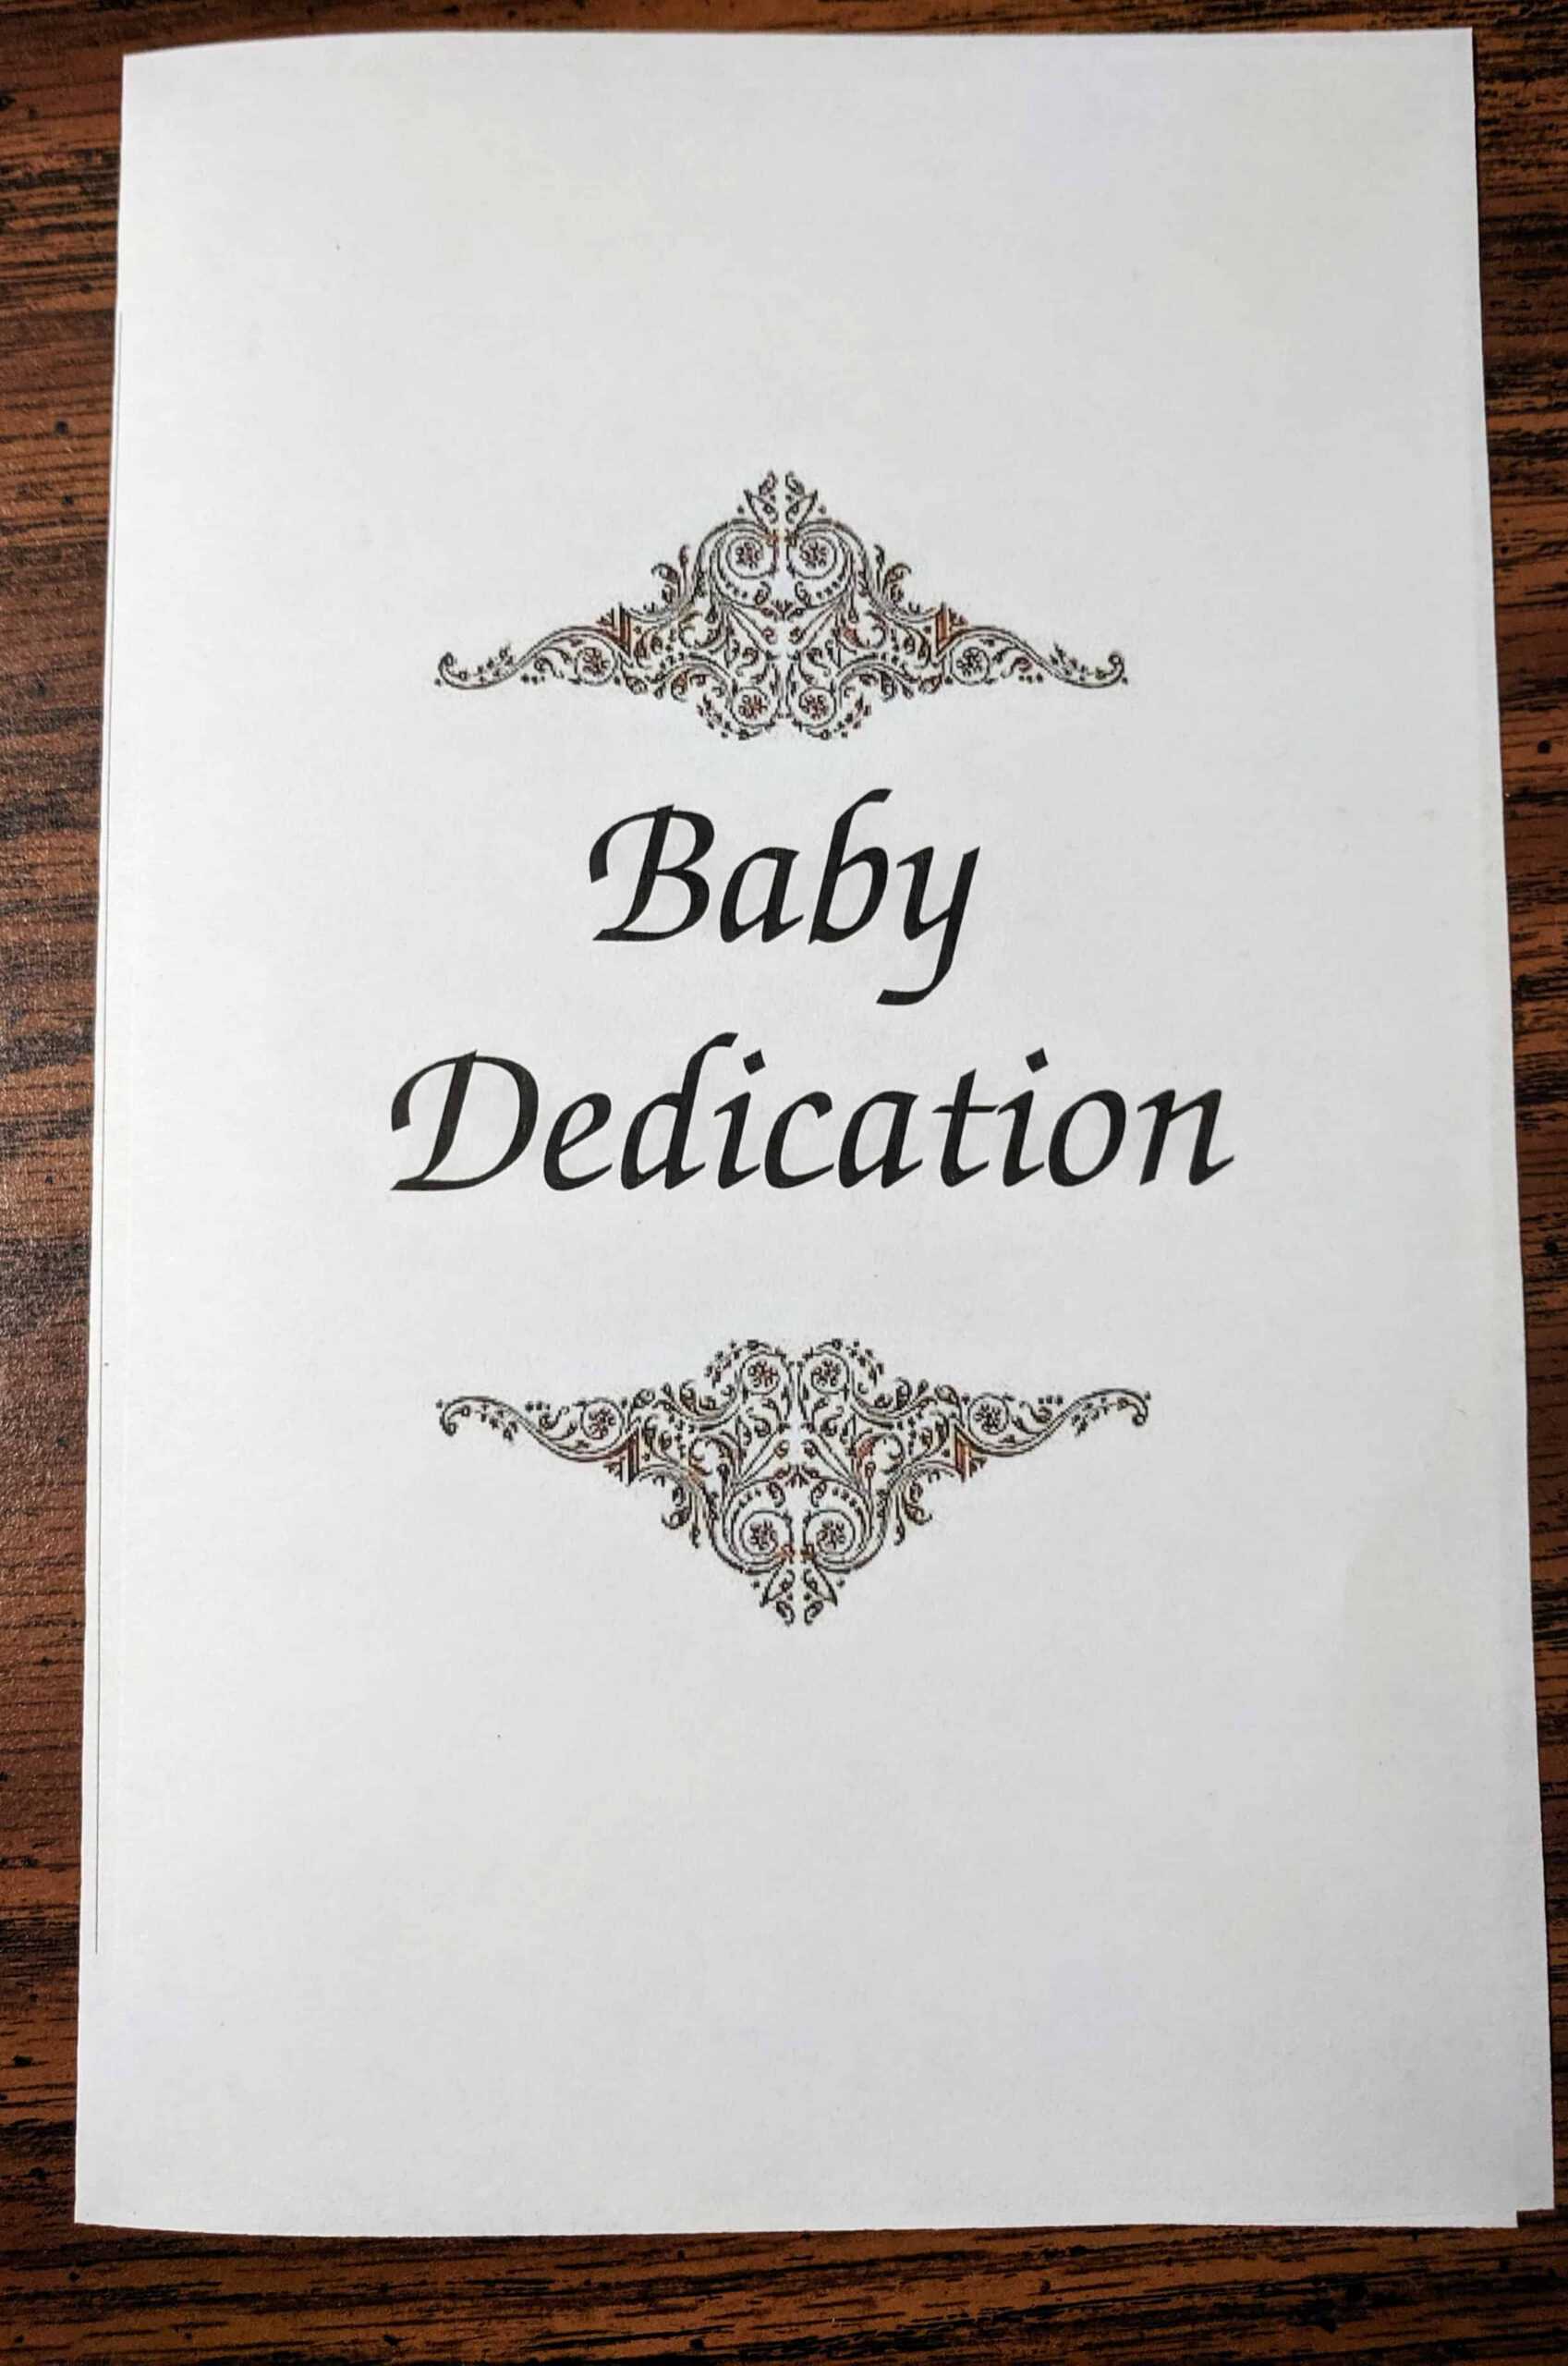 Baby Dedication" Ceremony Includes Prayer, Message, Certificate Intended For Baby Dedication Certificate Template